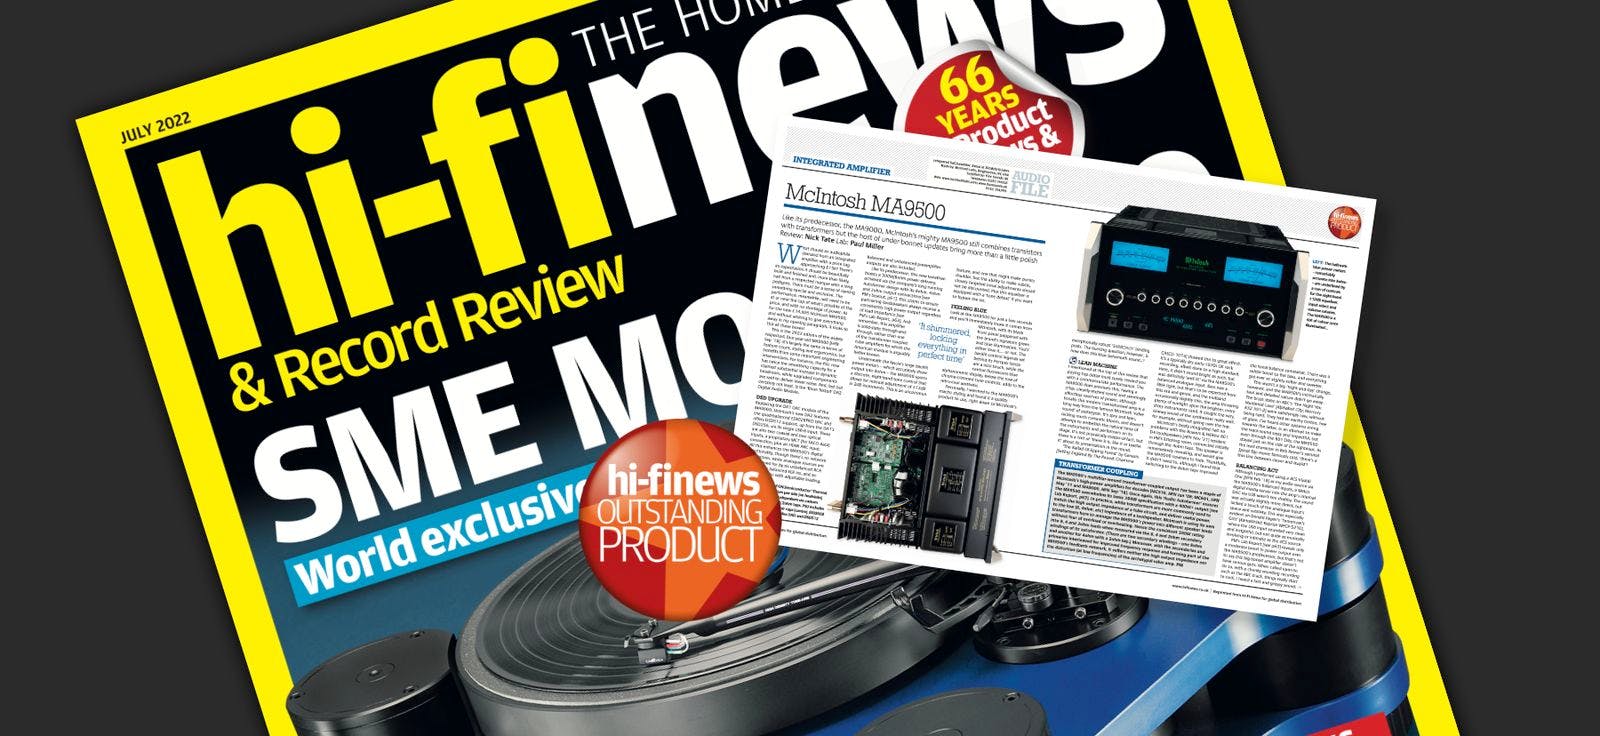 McIntosh MA9500 receives an 'Outstanding Product' award in the July issue of Hi-Fi News